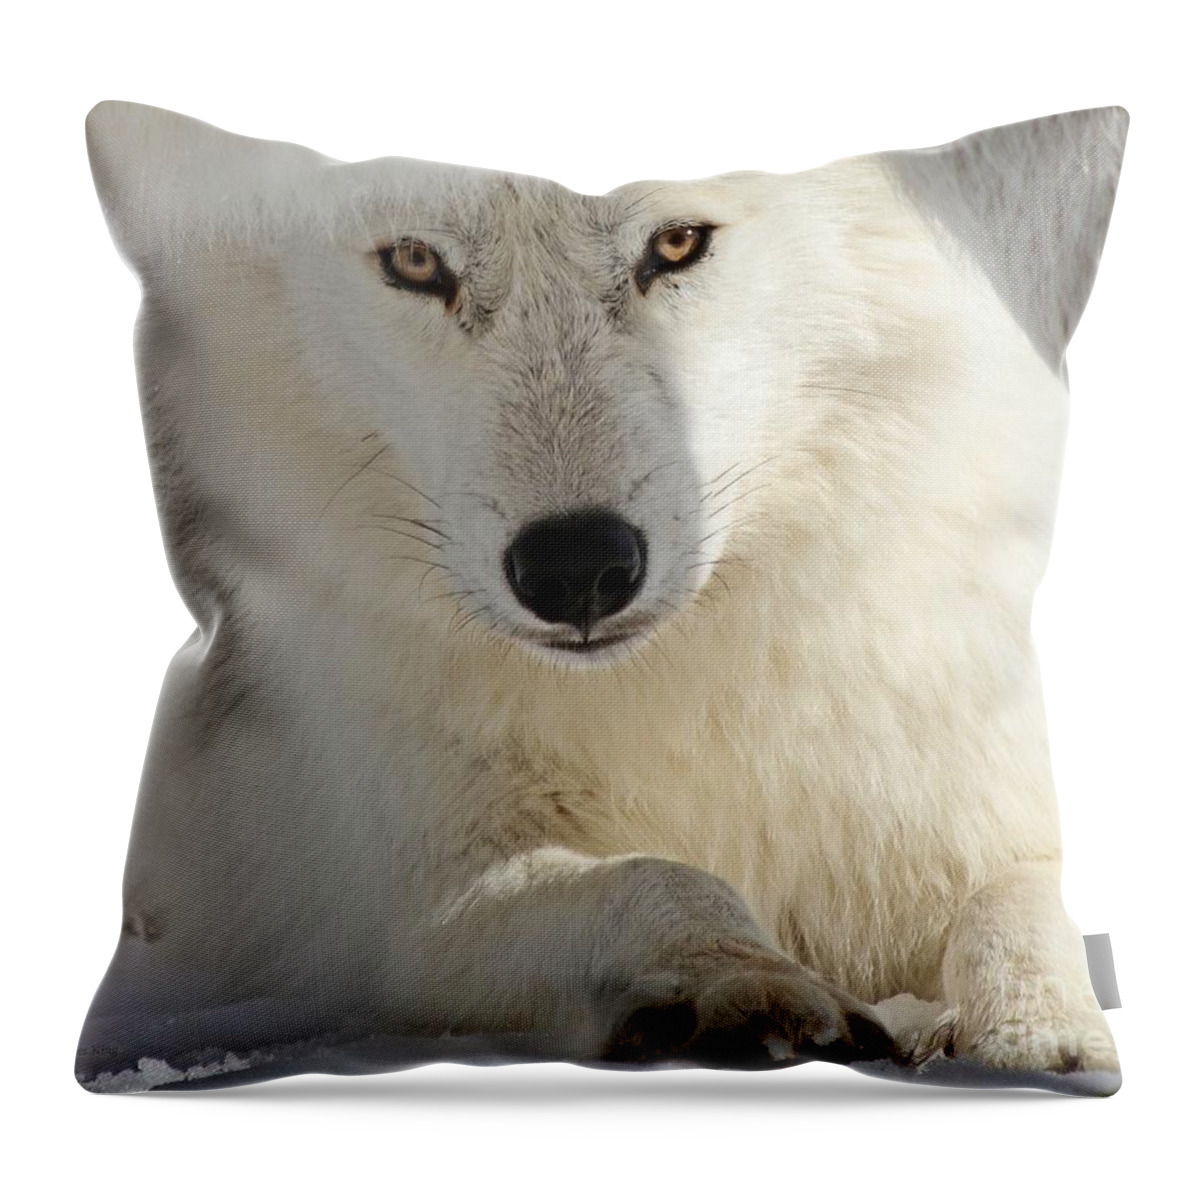 Inspire Throw Pillow featuring the photograph Obedience by Heather King